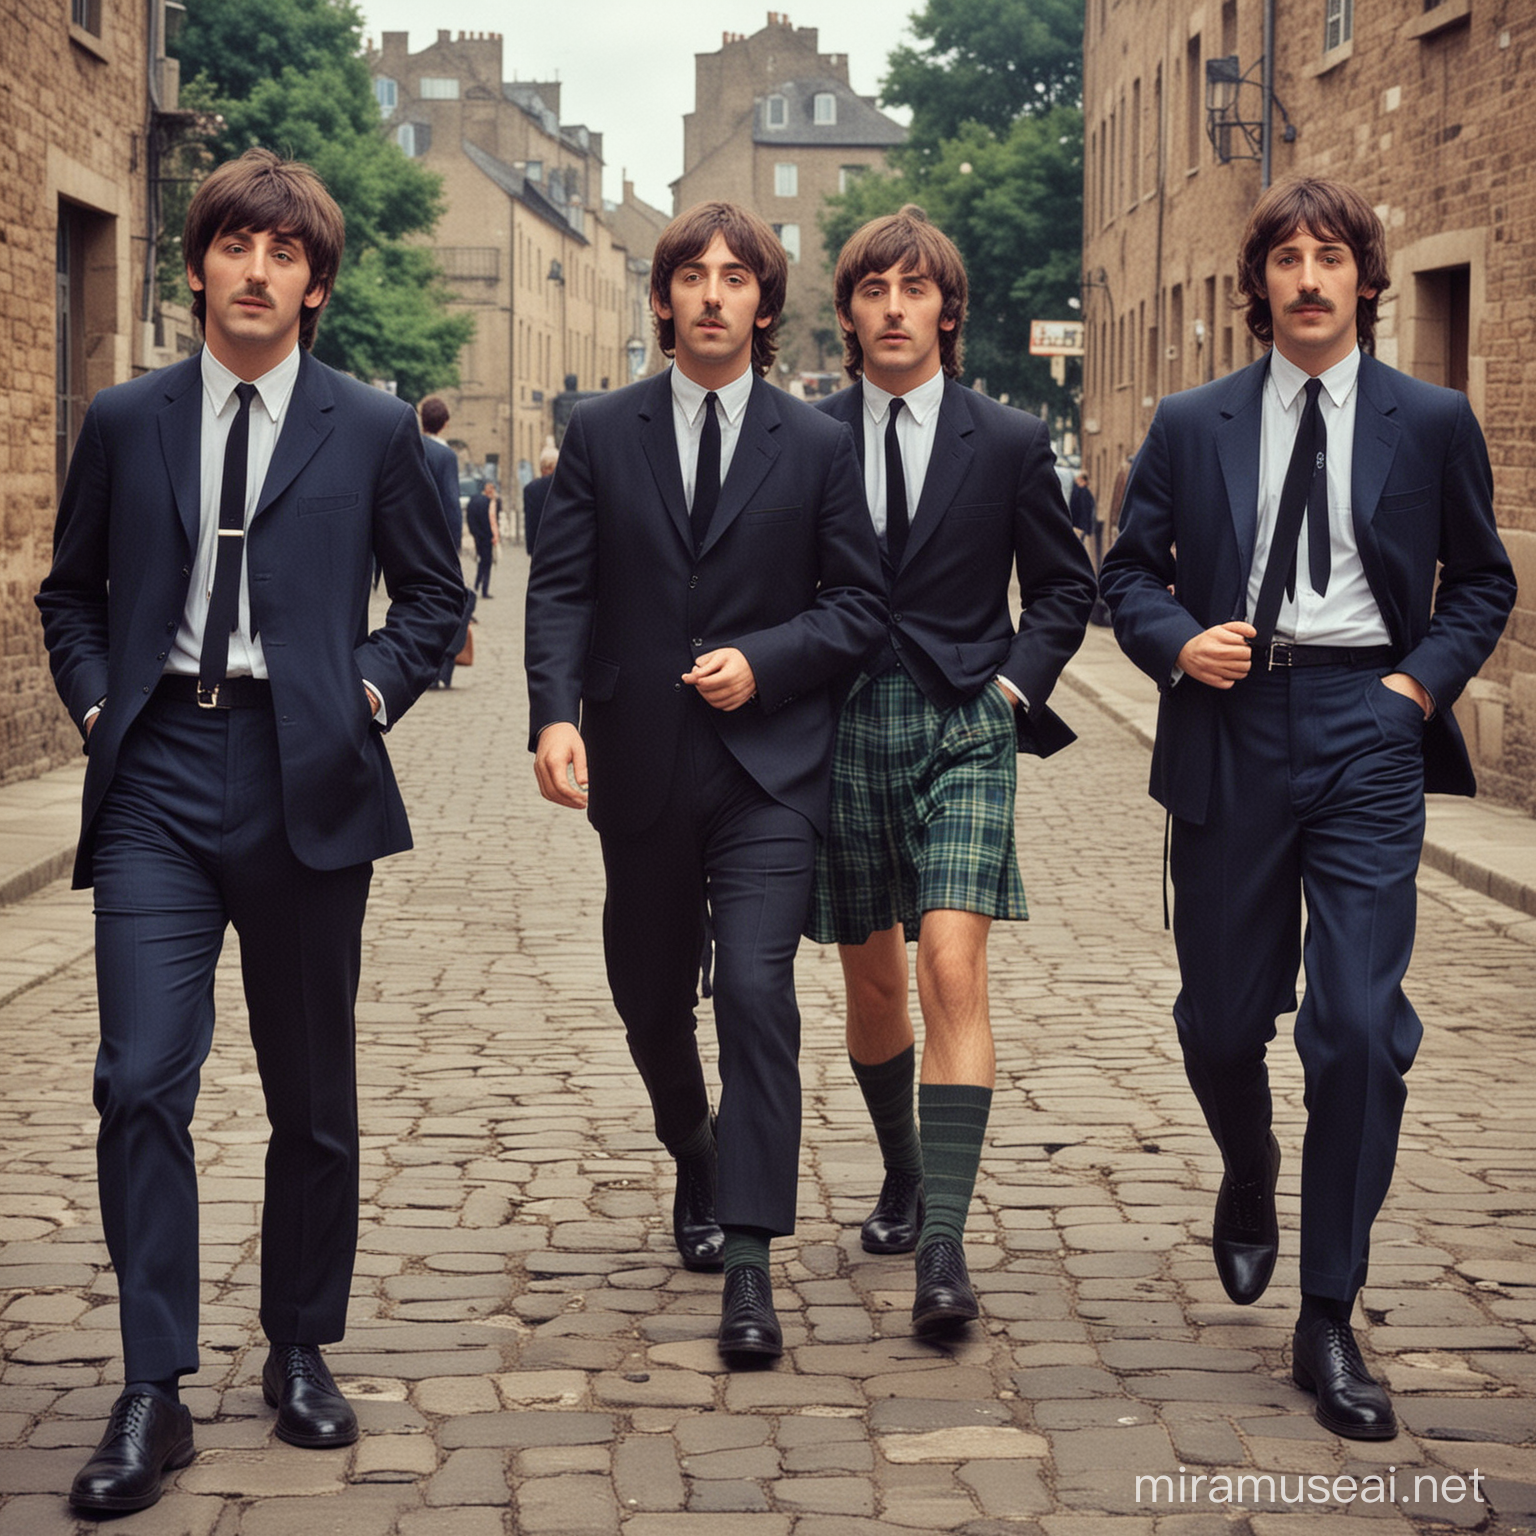 the beatles but one member is very stereotypical italian and another member is stereotypical scottish